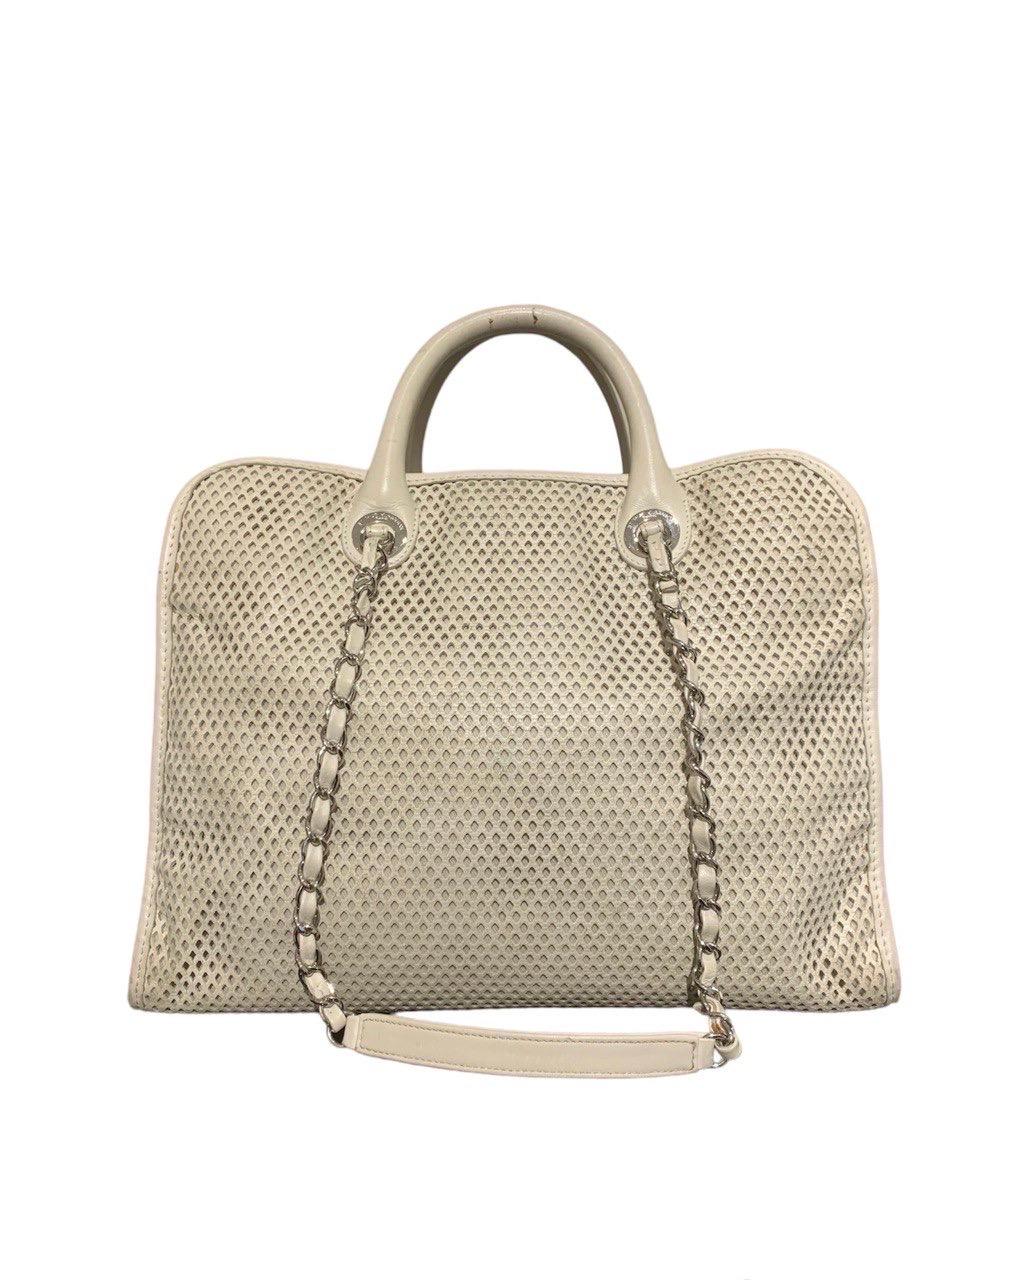 Chanel White Perforated Leather Shopper Deauville Bag In Good Condition In Torre Del Greco, IT